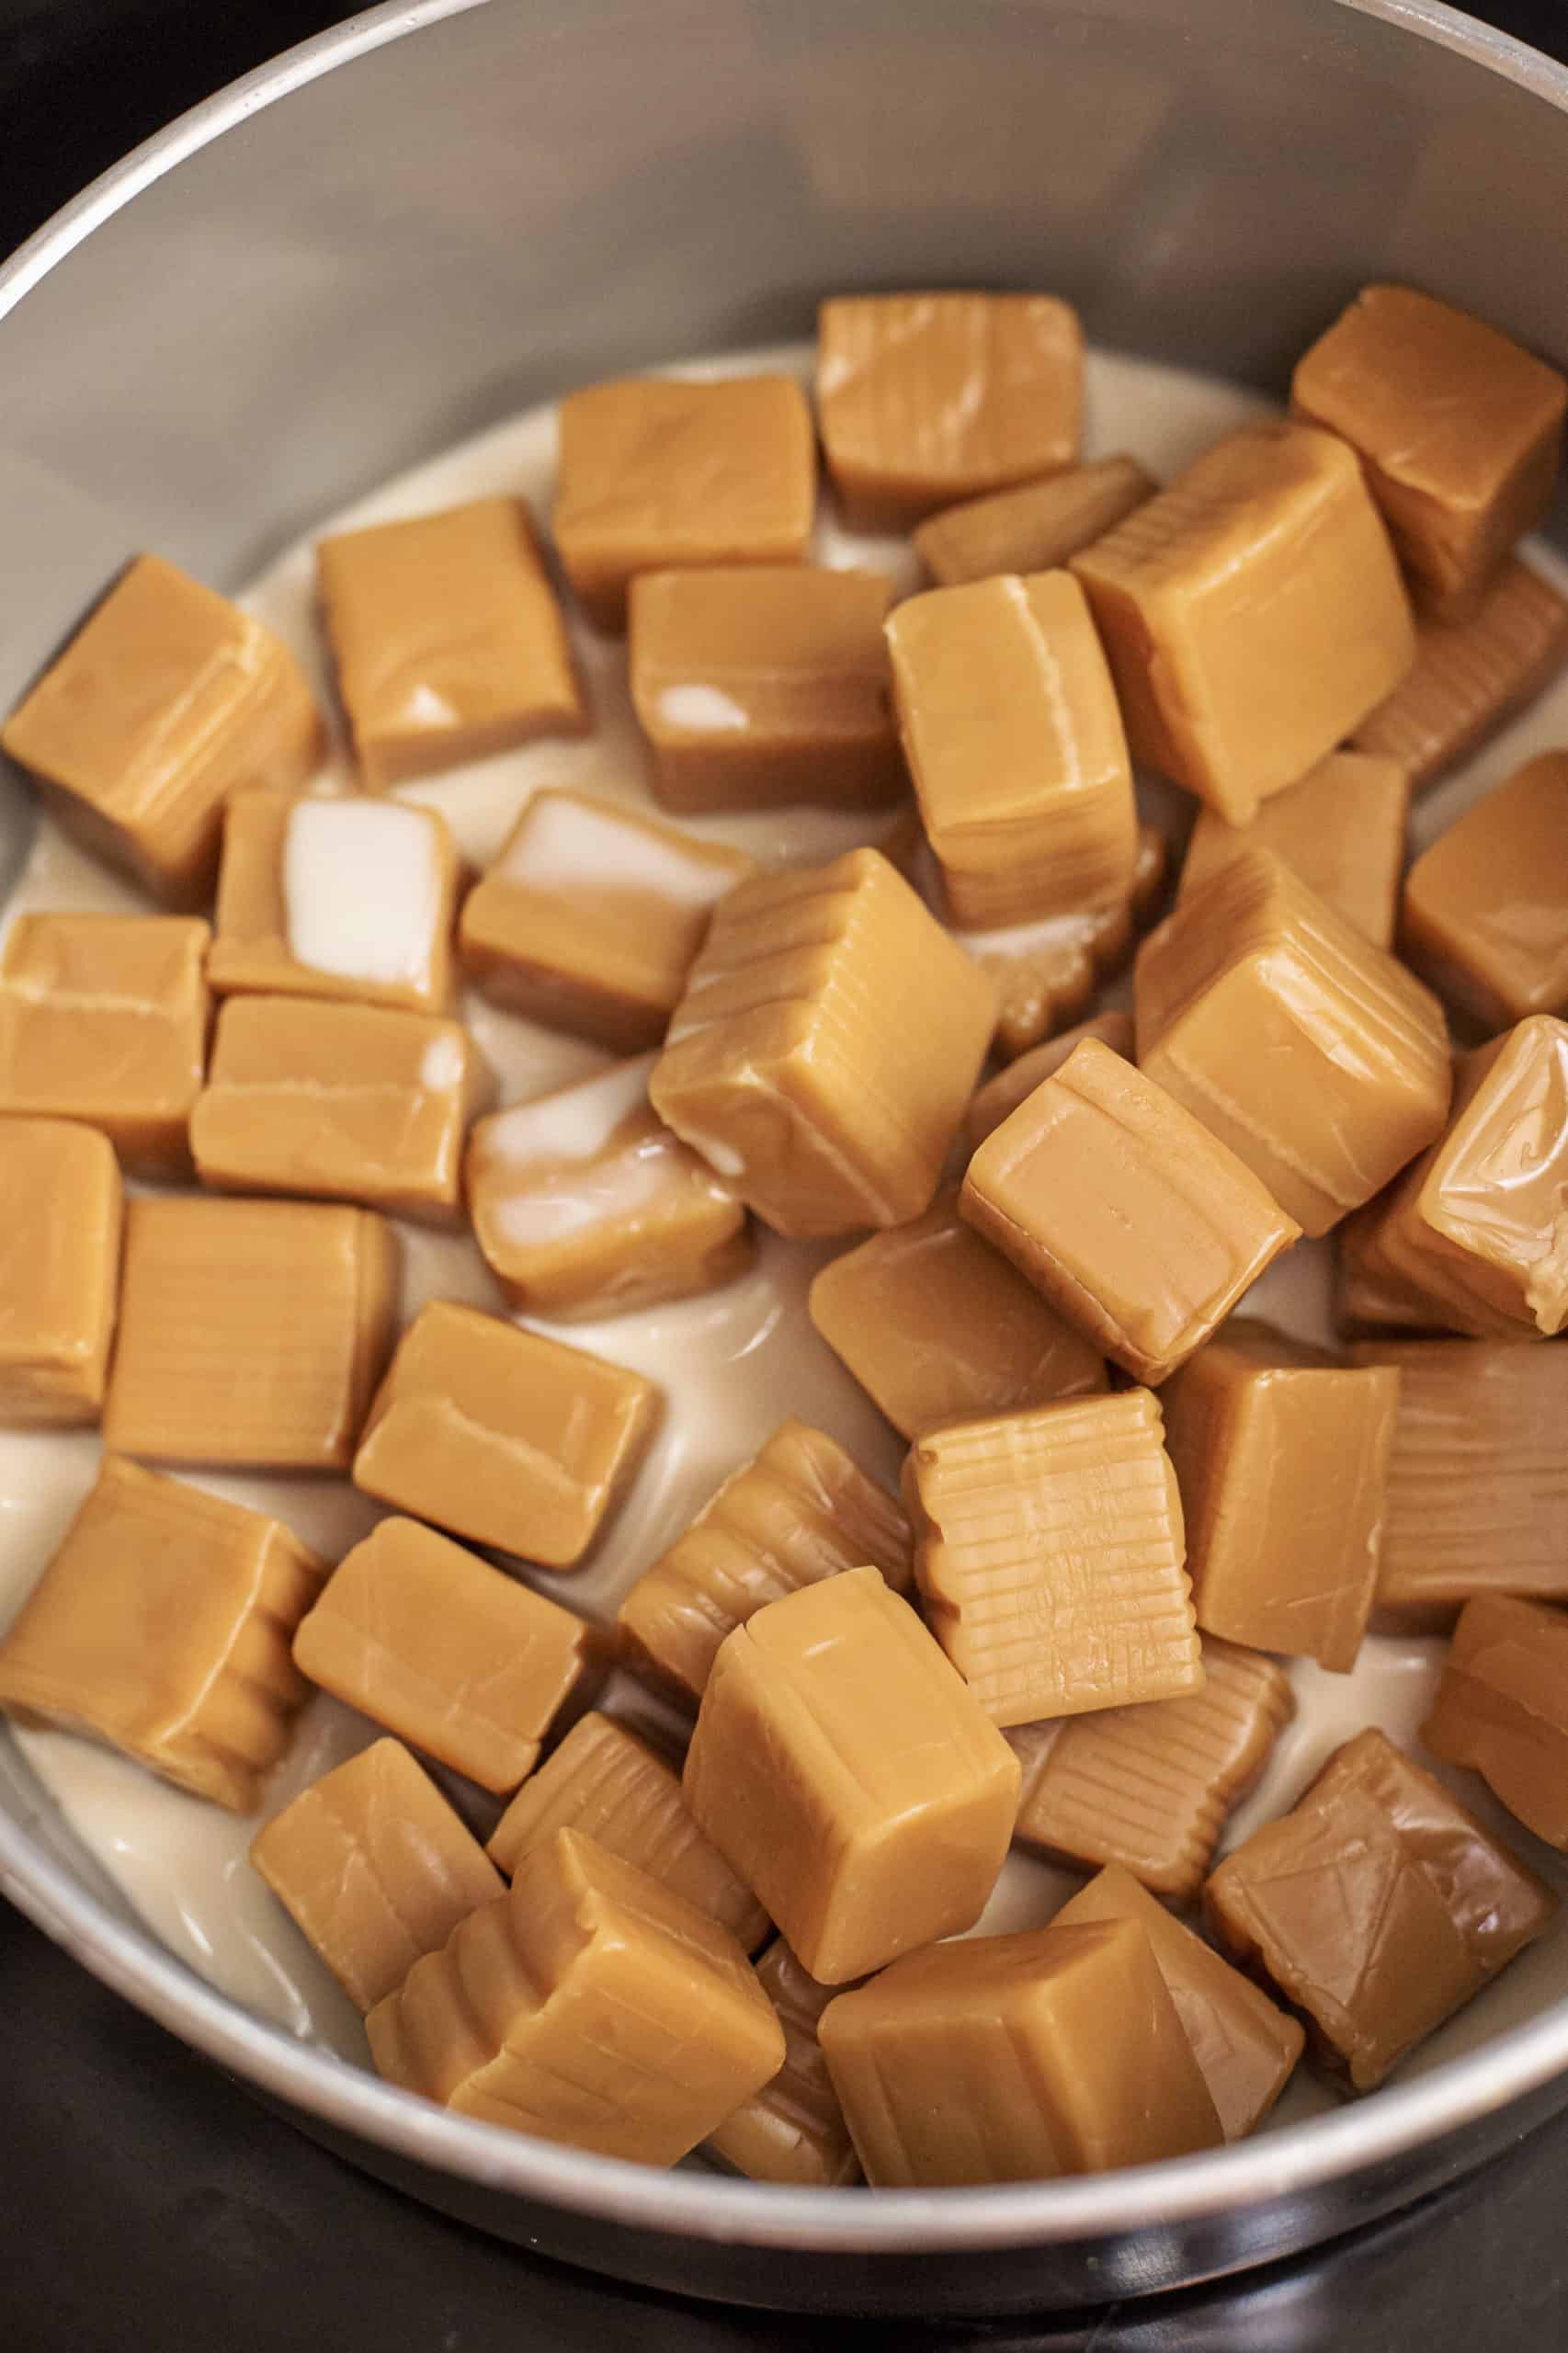 evaporated milk and caramels in the bottom of a saucepan.